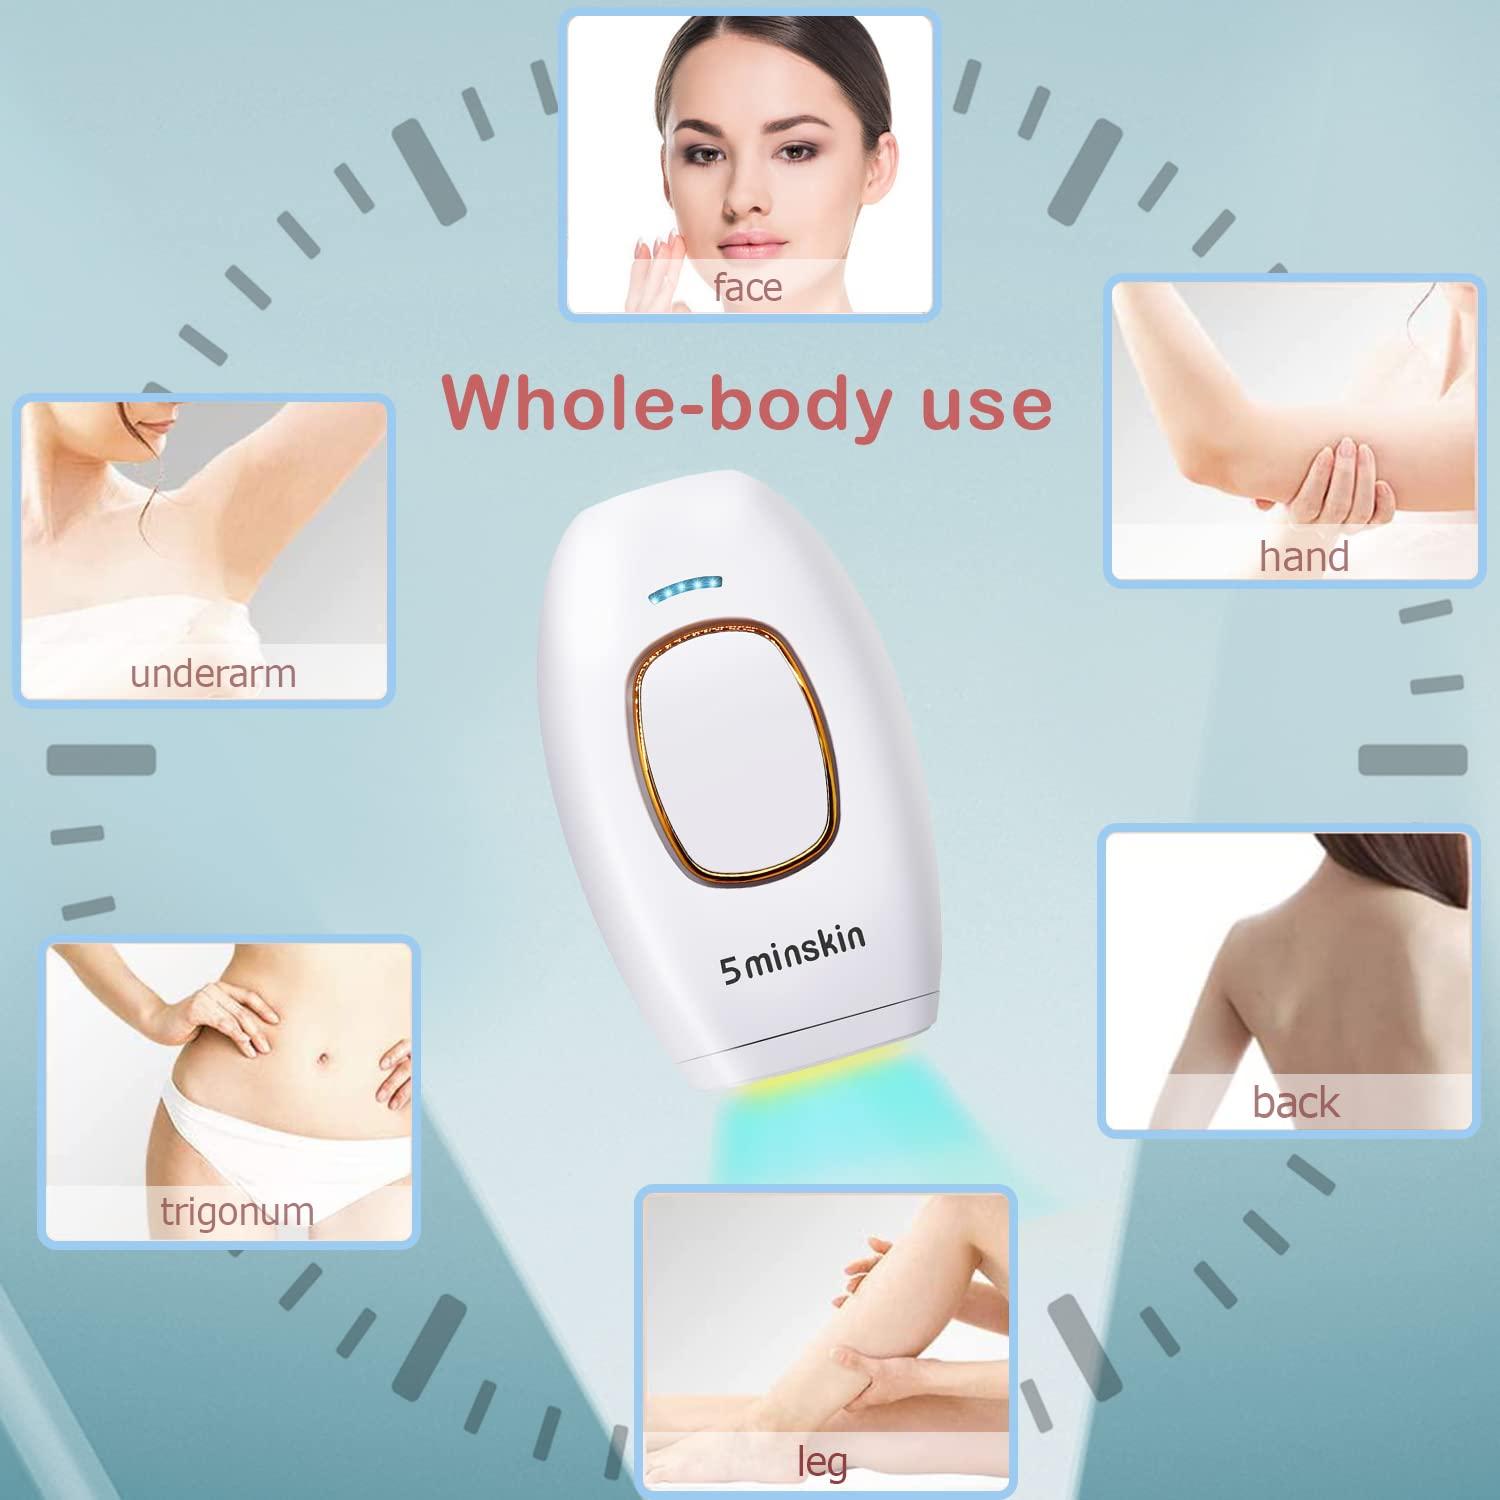 5minskin At-Home Laser Hair Removal Handset Long-lasting Reduction in Hair  Regrowth for Body & Face